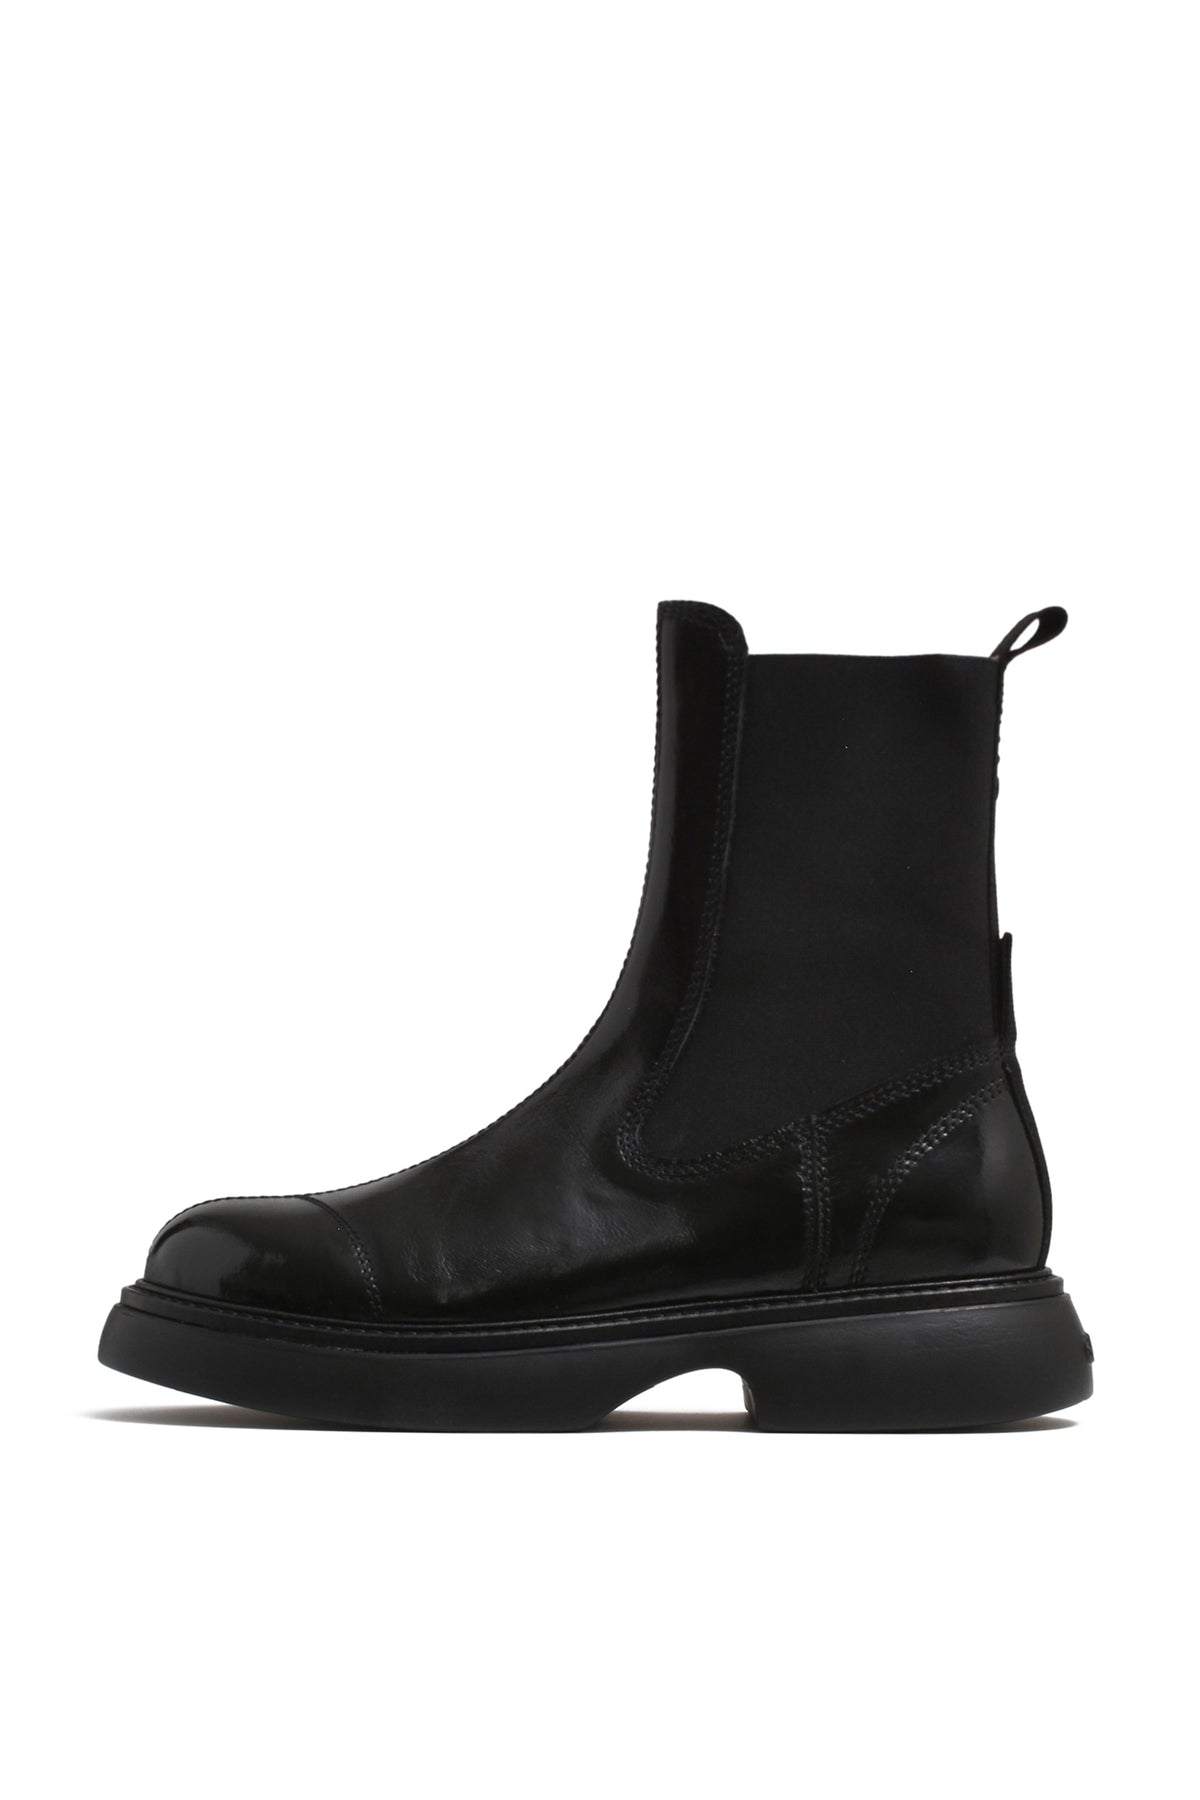 EVERYDAY MID CHELSEA BOOTS / BLK